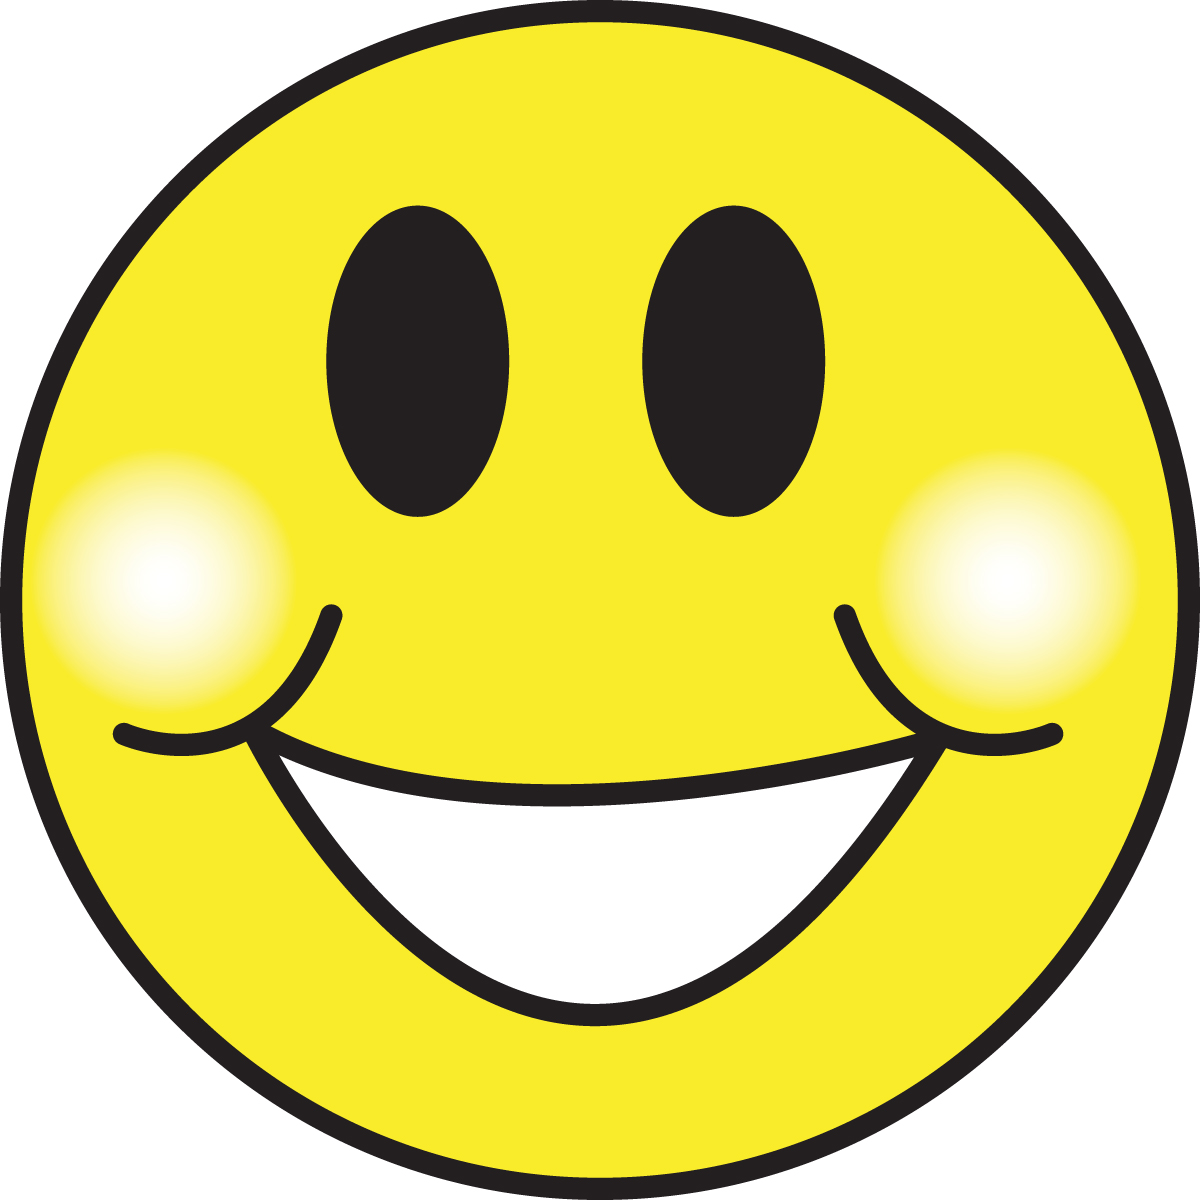 Smiley Face Emotions Images Hd Image Clipart